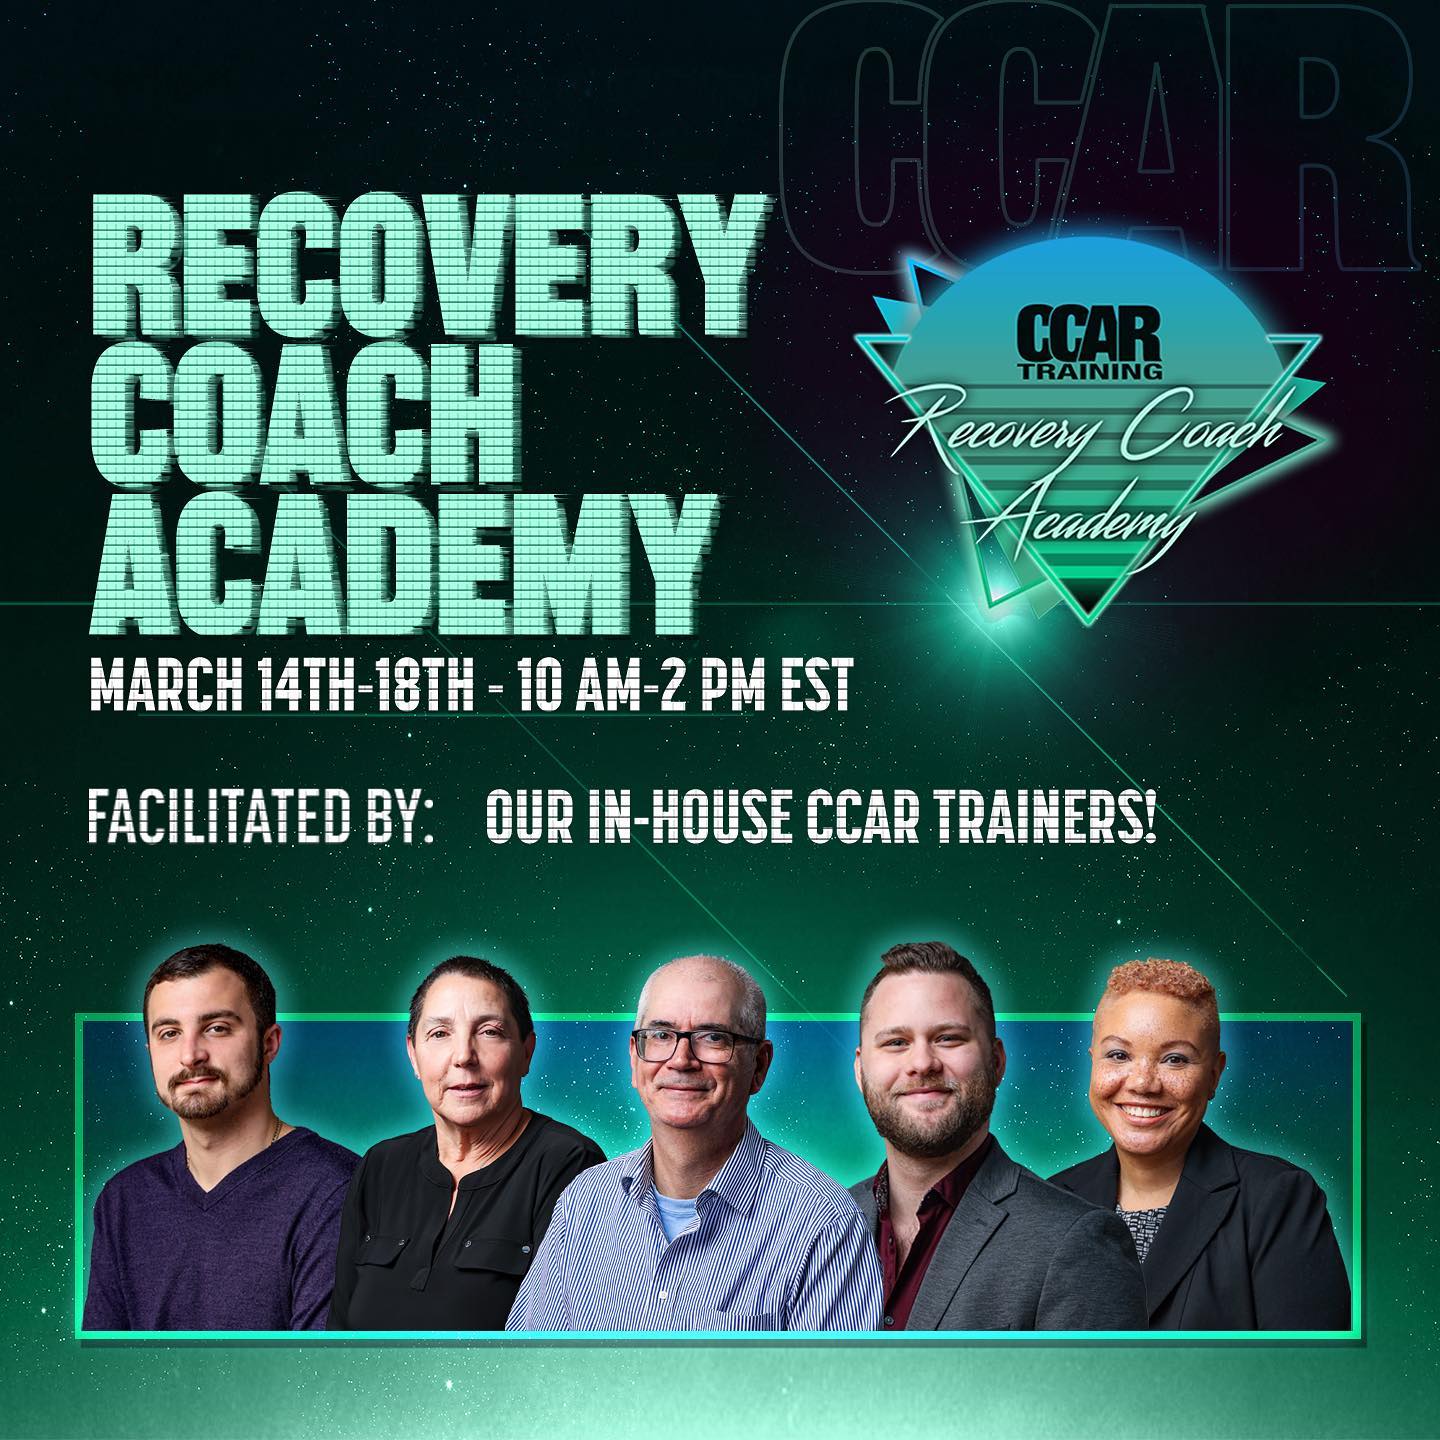 We are incredibly excited to be hosting our first Recovery Coach Academy in March! Each day, we are bringing in a different CCAR staff member and subject matter expert to further enhance and engage you in your training experience!

REGISTER TODAY: https://addictionrecoverytraining.org/cart-events/. 

#recovery #recoverycoach #recoverycoaching #recoveryispossible #recoverycoachingworks #recoverymatters #virtuallearning #onlinetraining #trainer #peersupport #wecanrecover #recoveryjourney #facilitators #march #upcomingopportunities